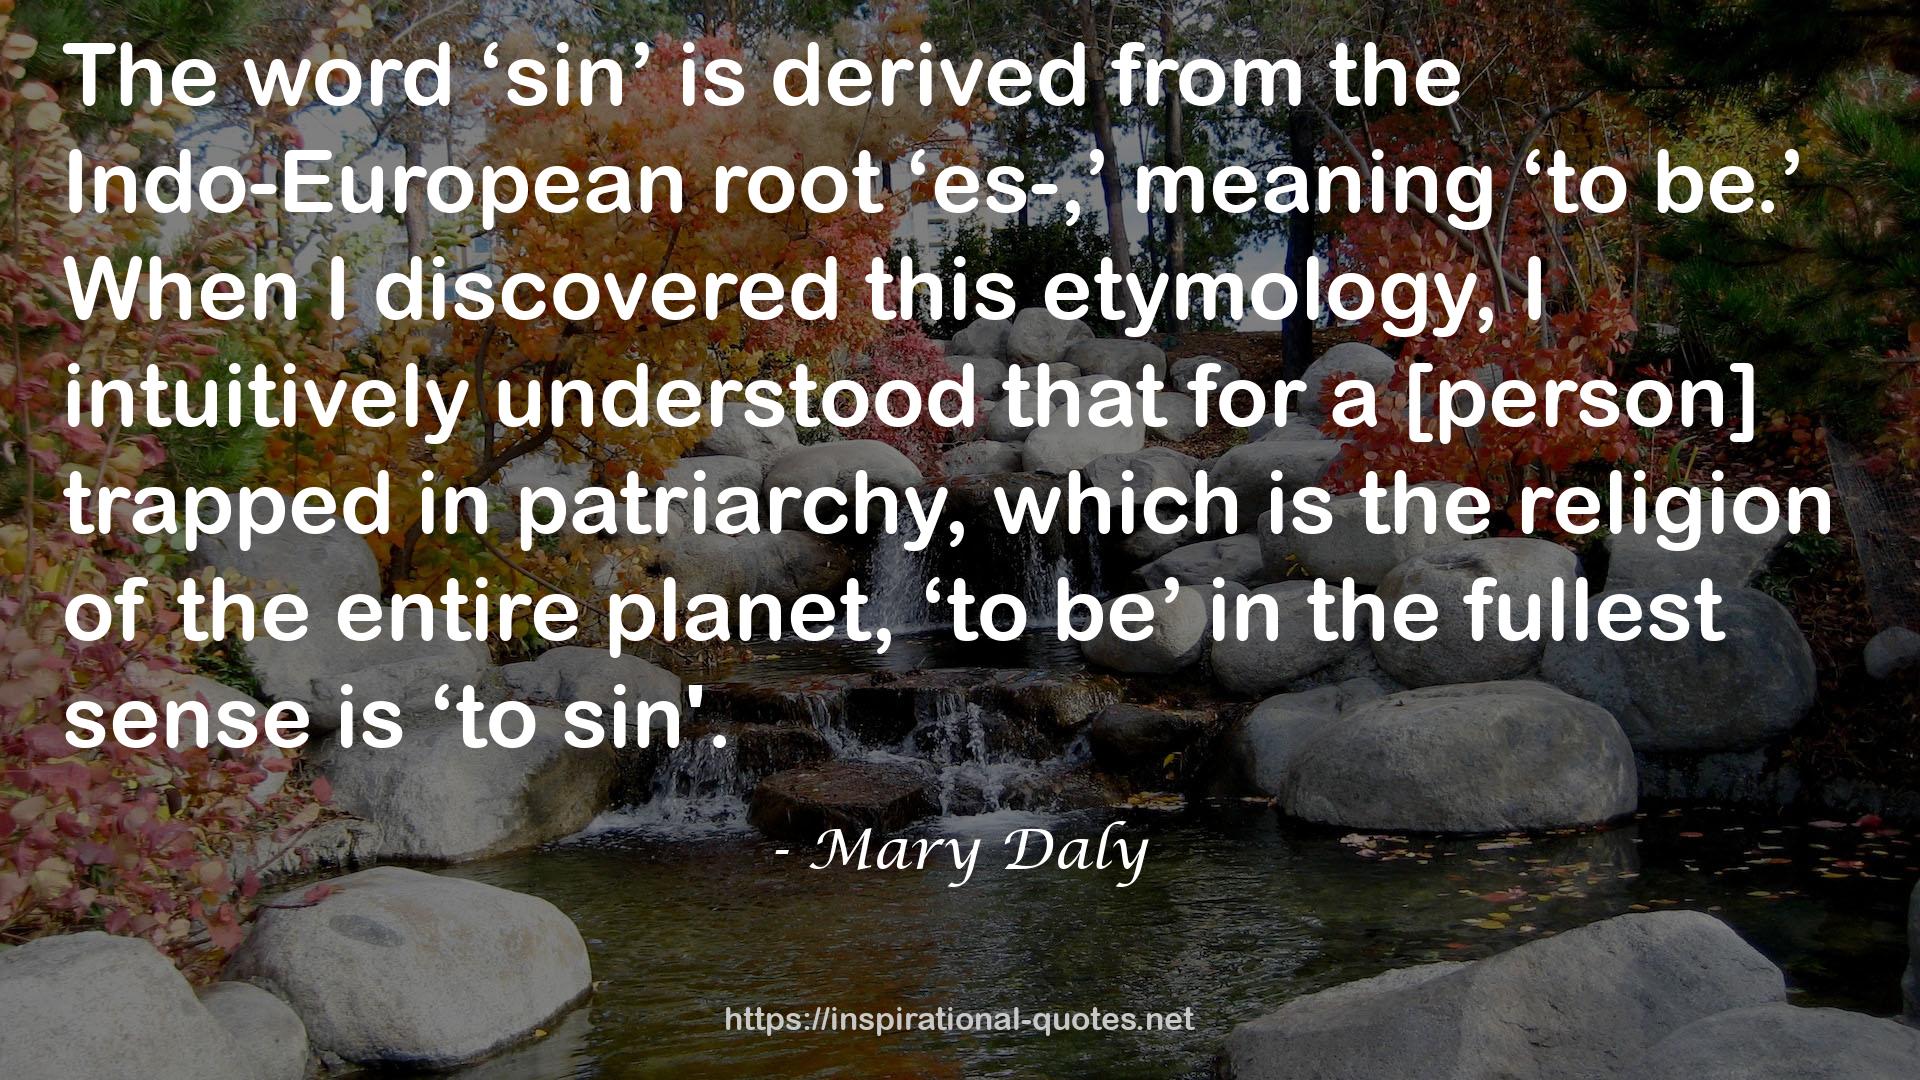 Mary Daly QUOTES